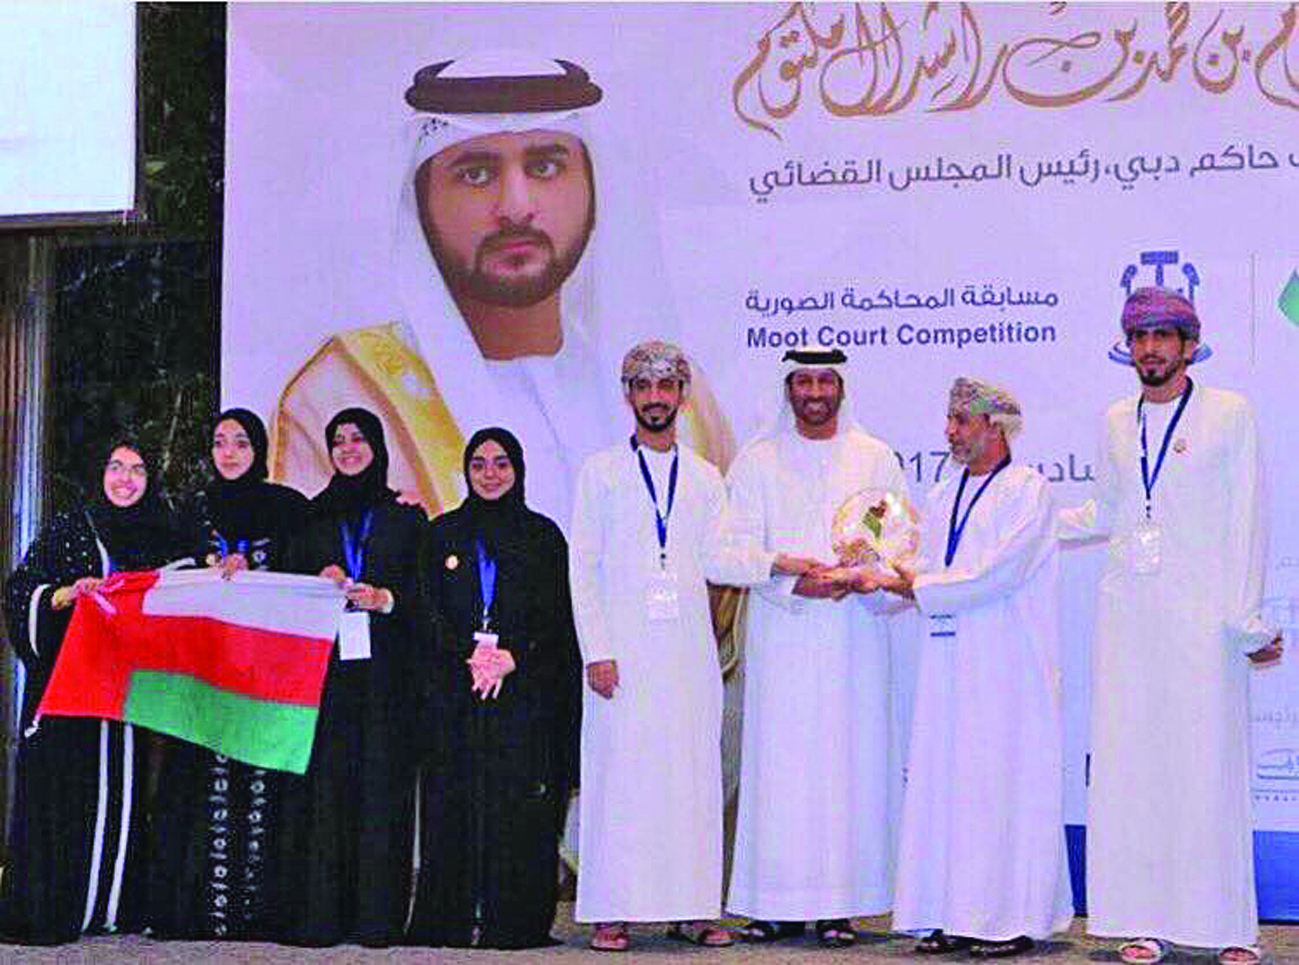 Sultan Qaboos University students bag first place in Dubai competition